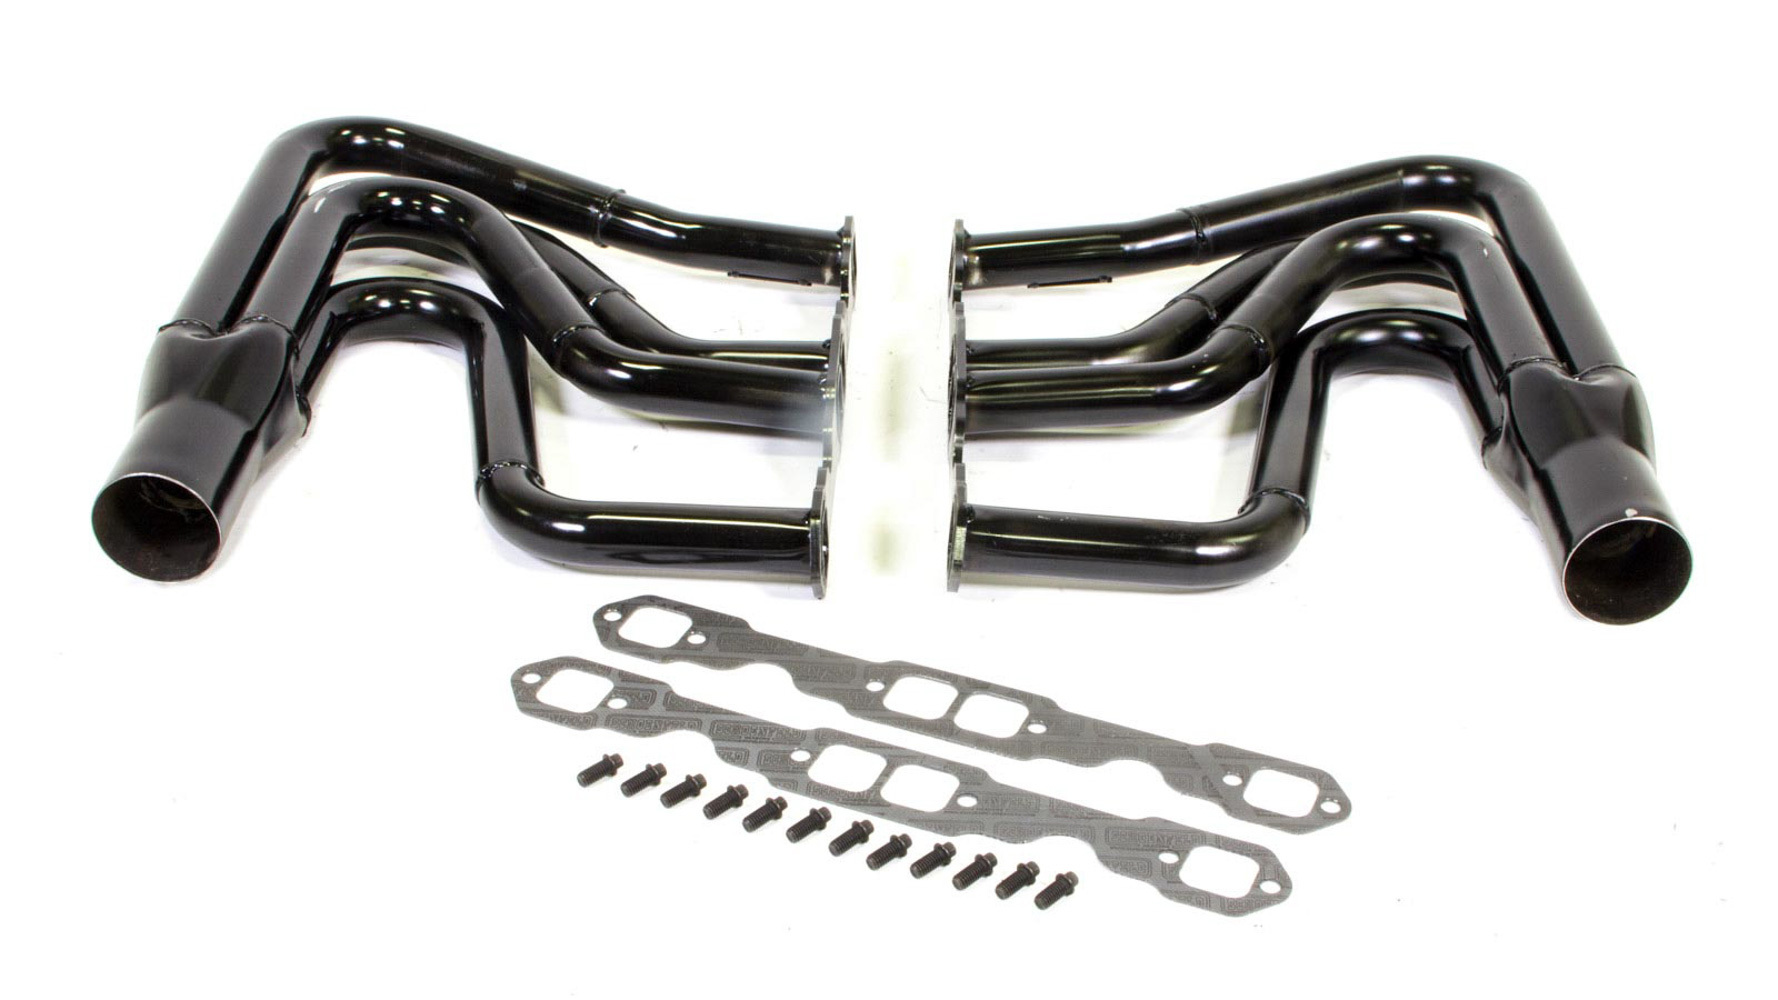 Schoenfeld Headers 1122BVUSH-3 - Headers, DIRT Modified, 1-5/8 to 1-3/4 in Primary, 3 in Collector, Steel, Black Paint, Bicknell / TEO / Troyer Spec Head, Small Block Chevy, Kit